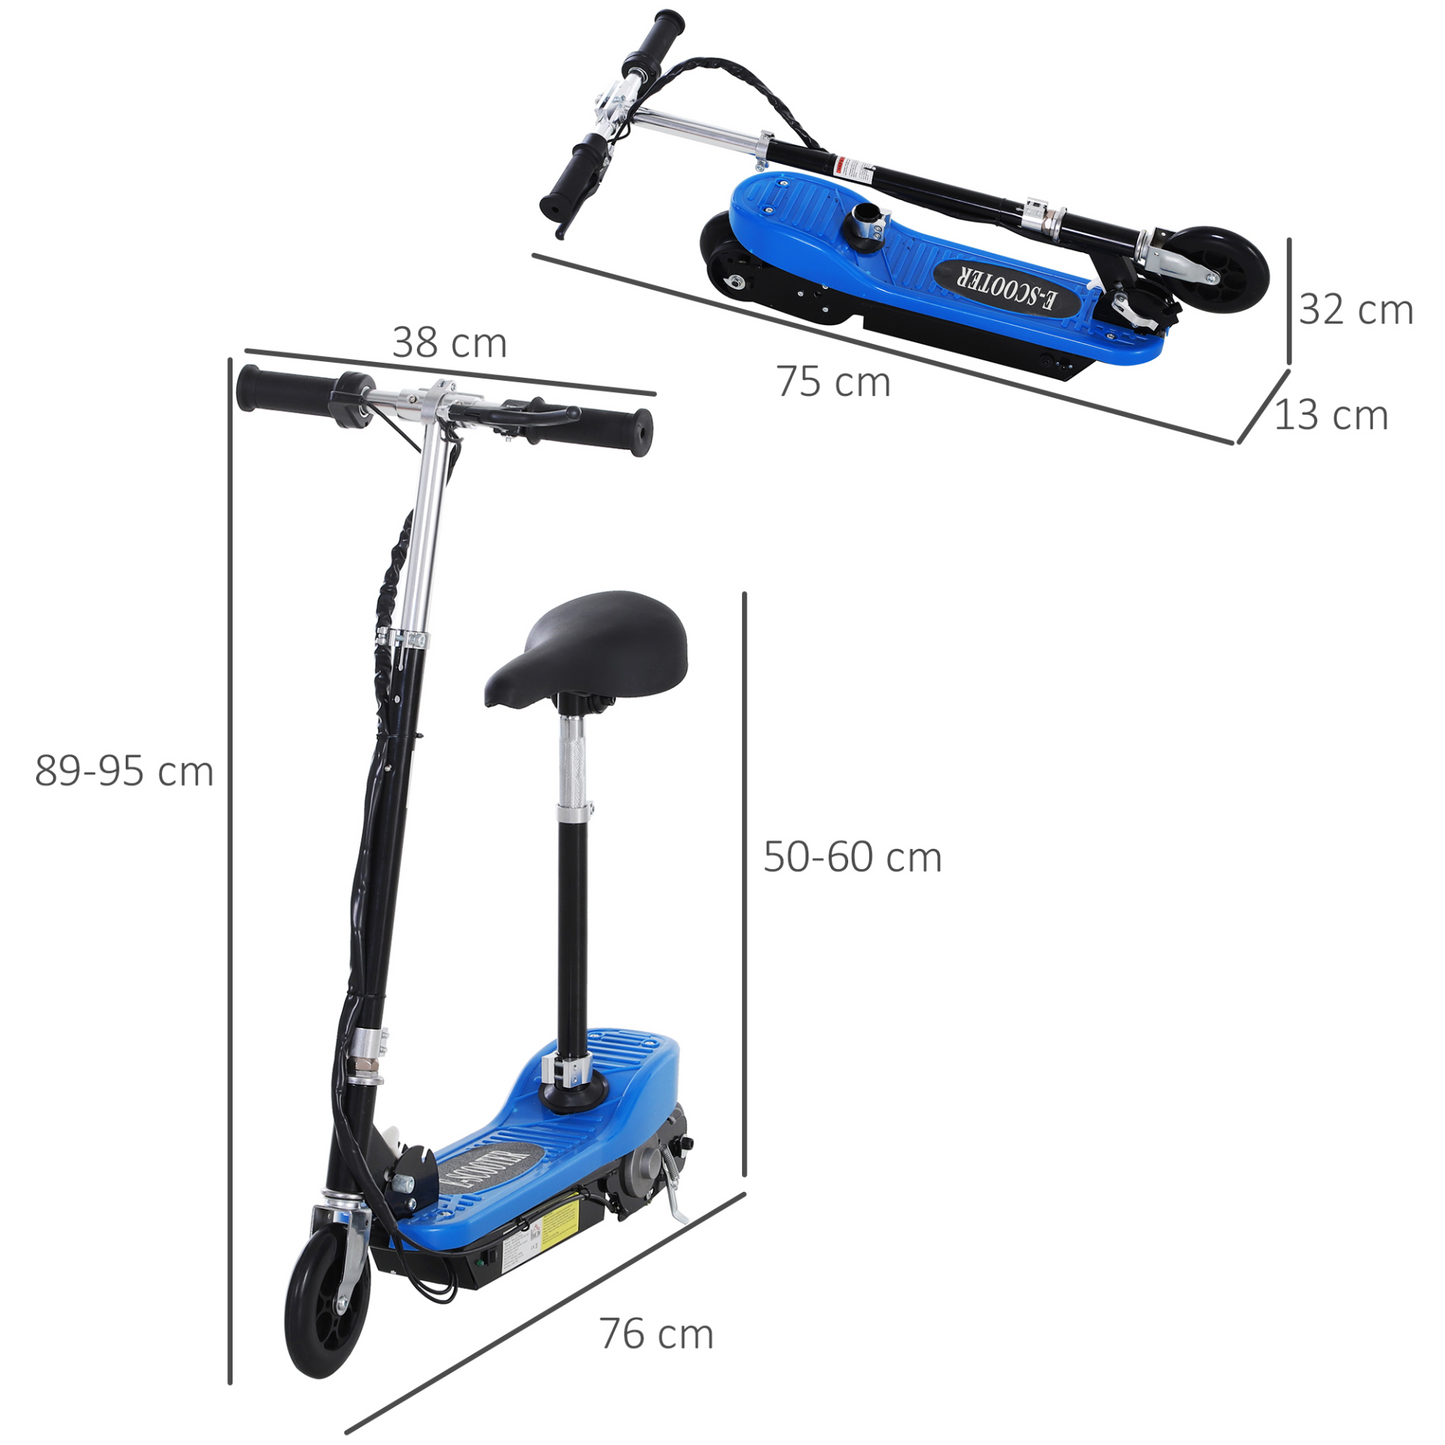 HOMCOM Outdoor Ride On Powered Scooter for kids Sporting Toy 120W Motor Bike 2 x 12V Battery - Blue